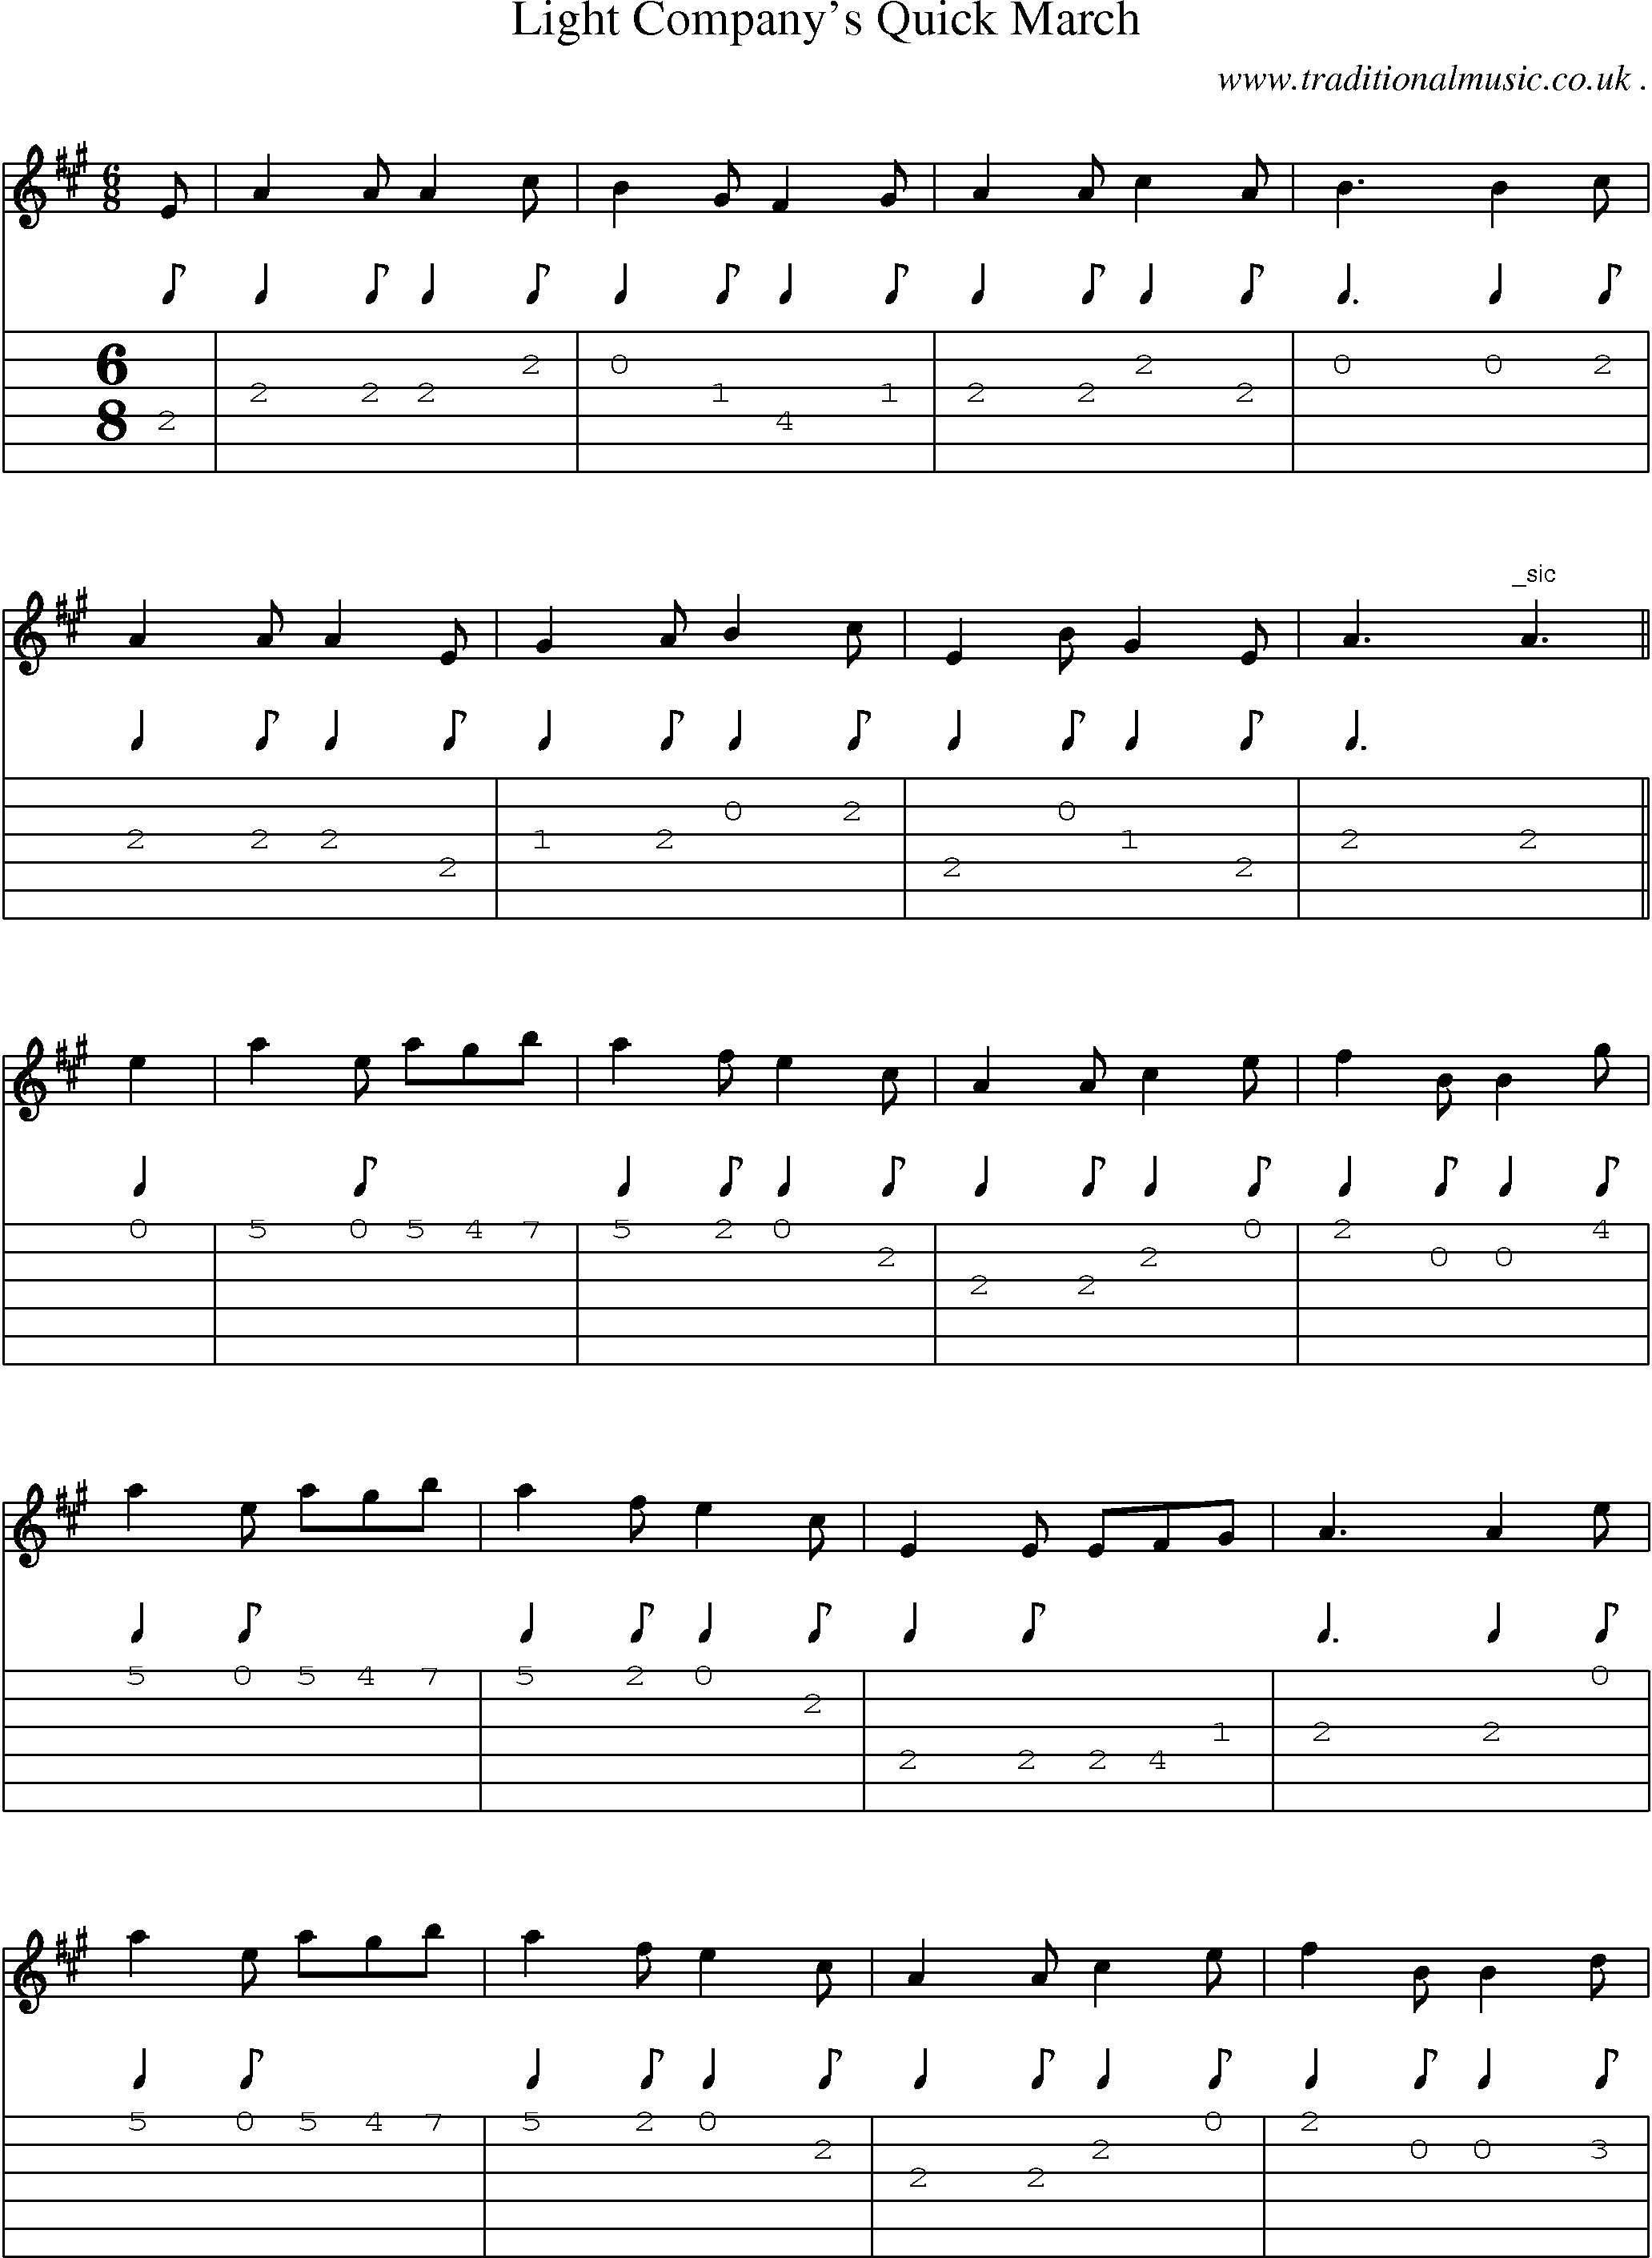 Sheet-Music and Guitar Tabs for Light Companys Quick March